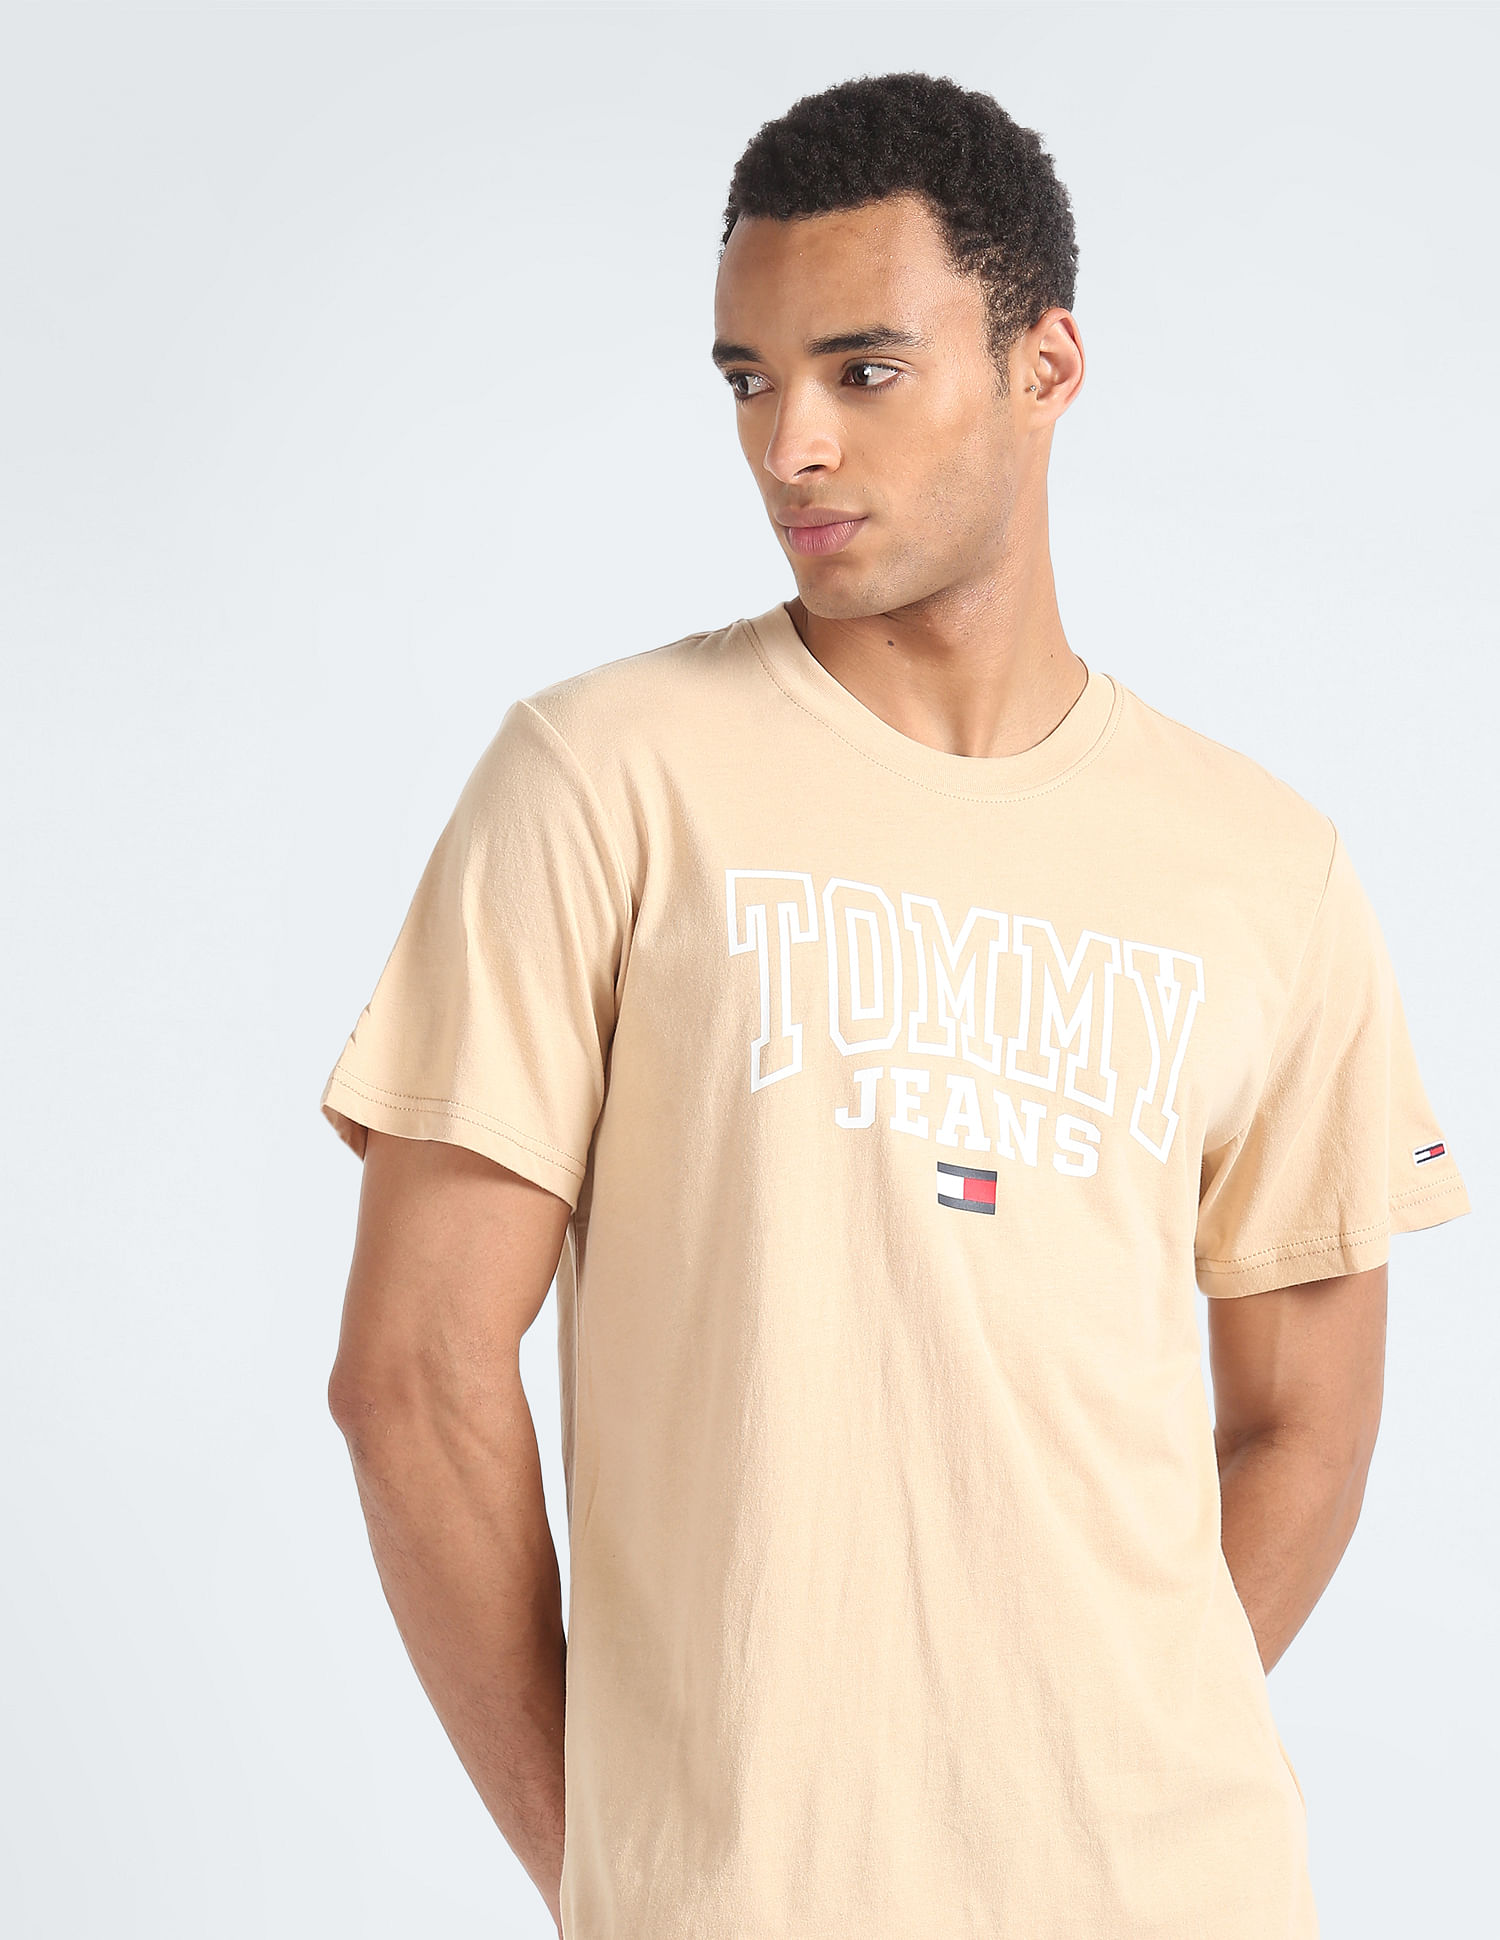 Buy Tommy Transitional Entry T-Shirt Cotton Hilfiger Print